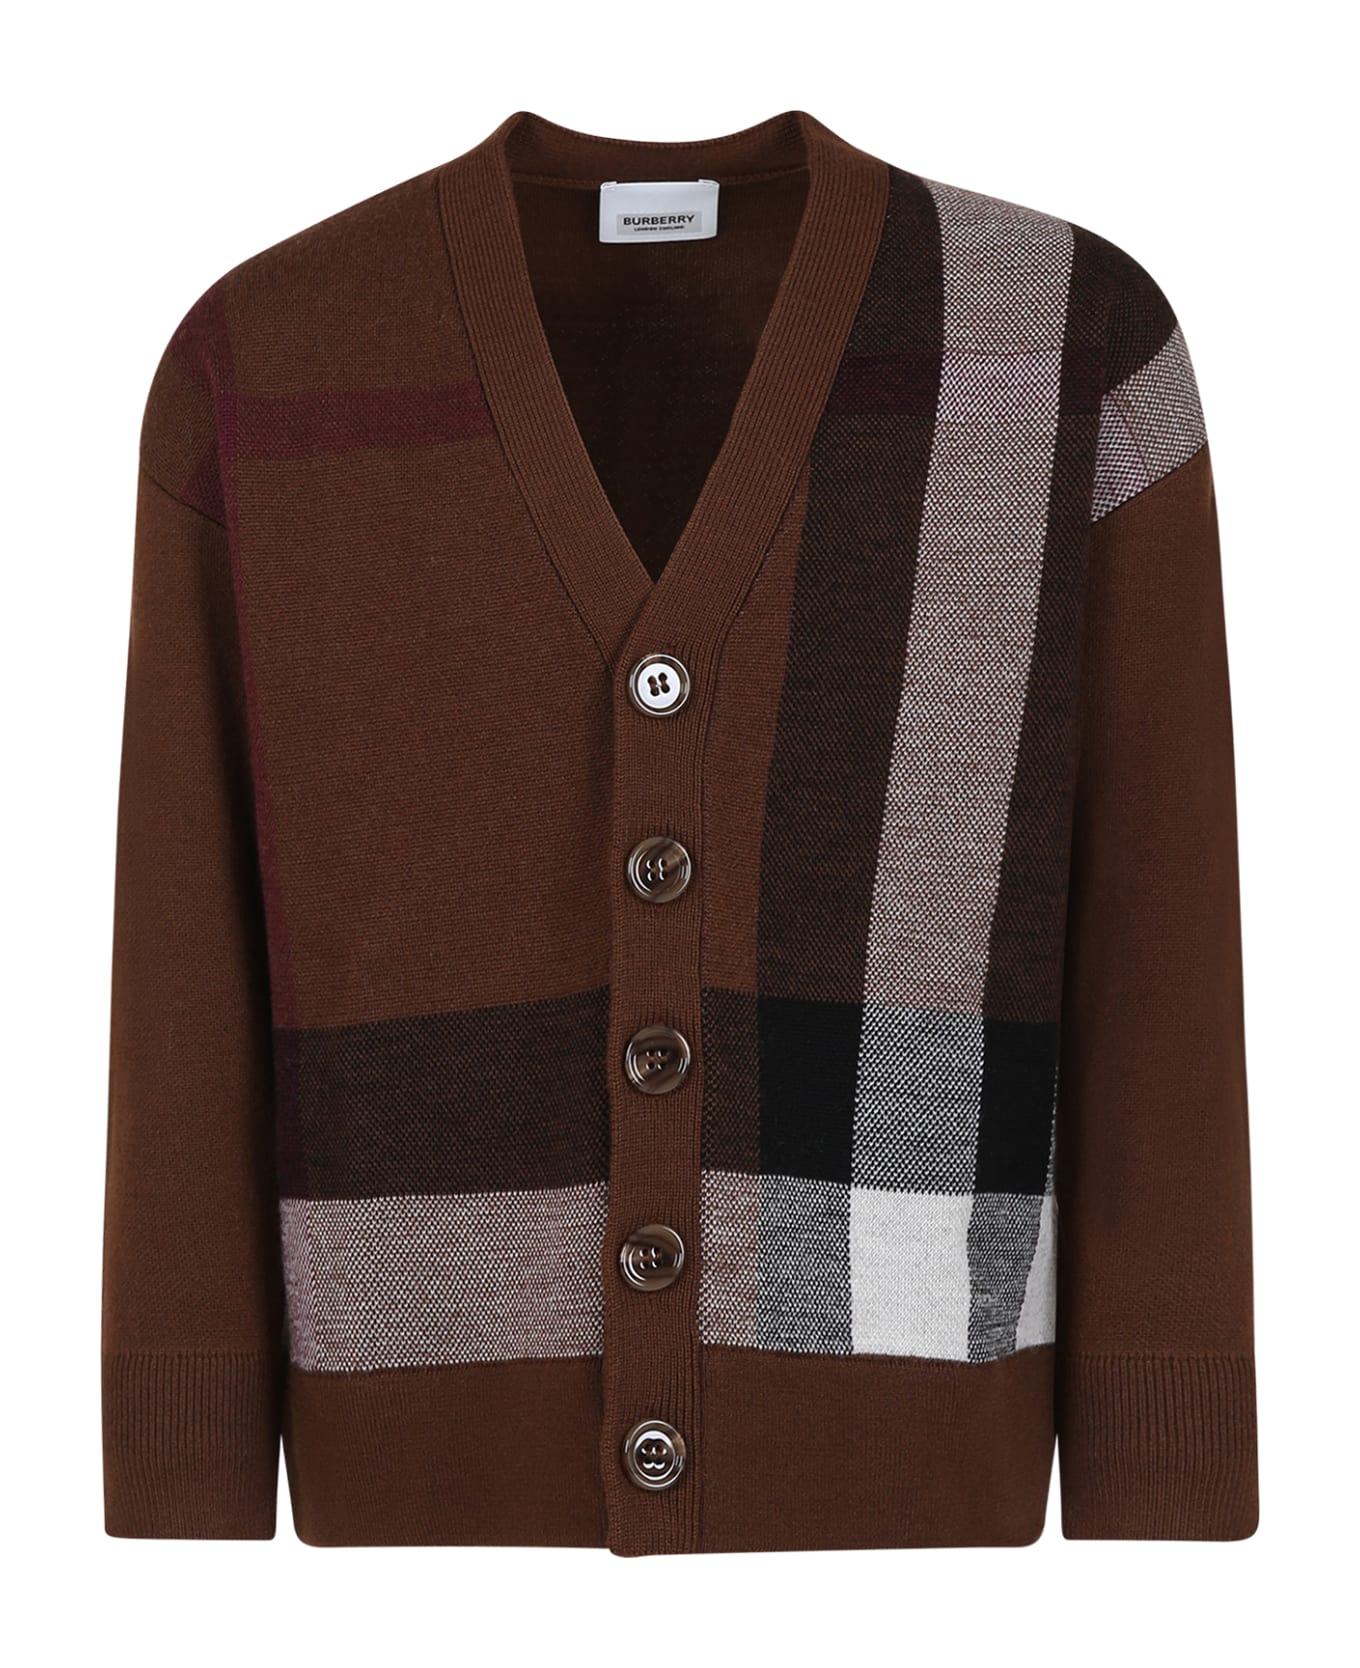 Burberry Brown Cardigan For Boy With Vintage Chec - Brown ニットウェア＆スウェットシャツ